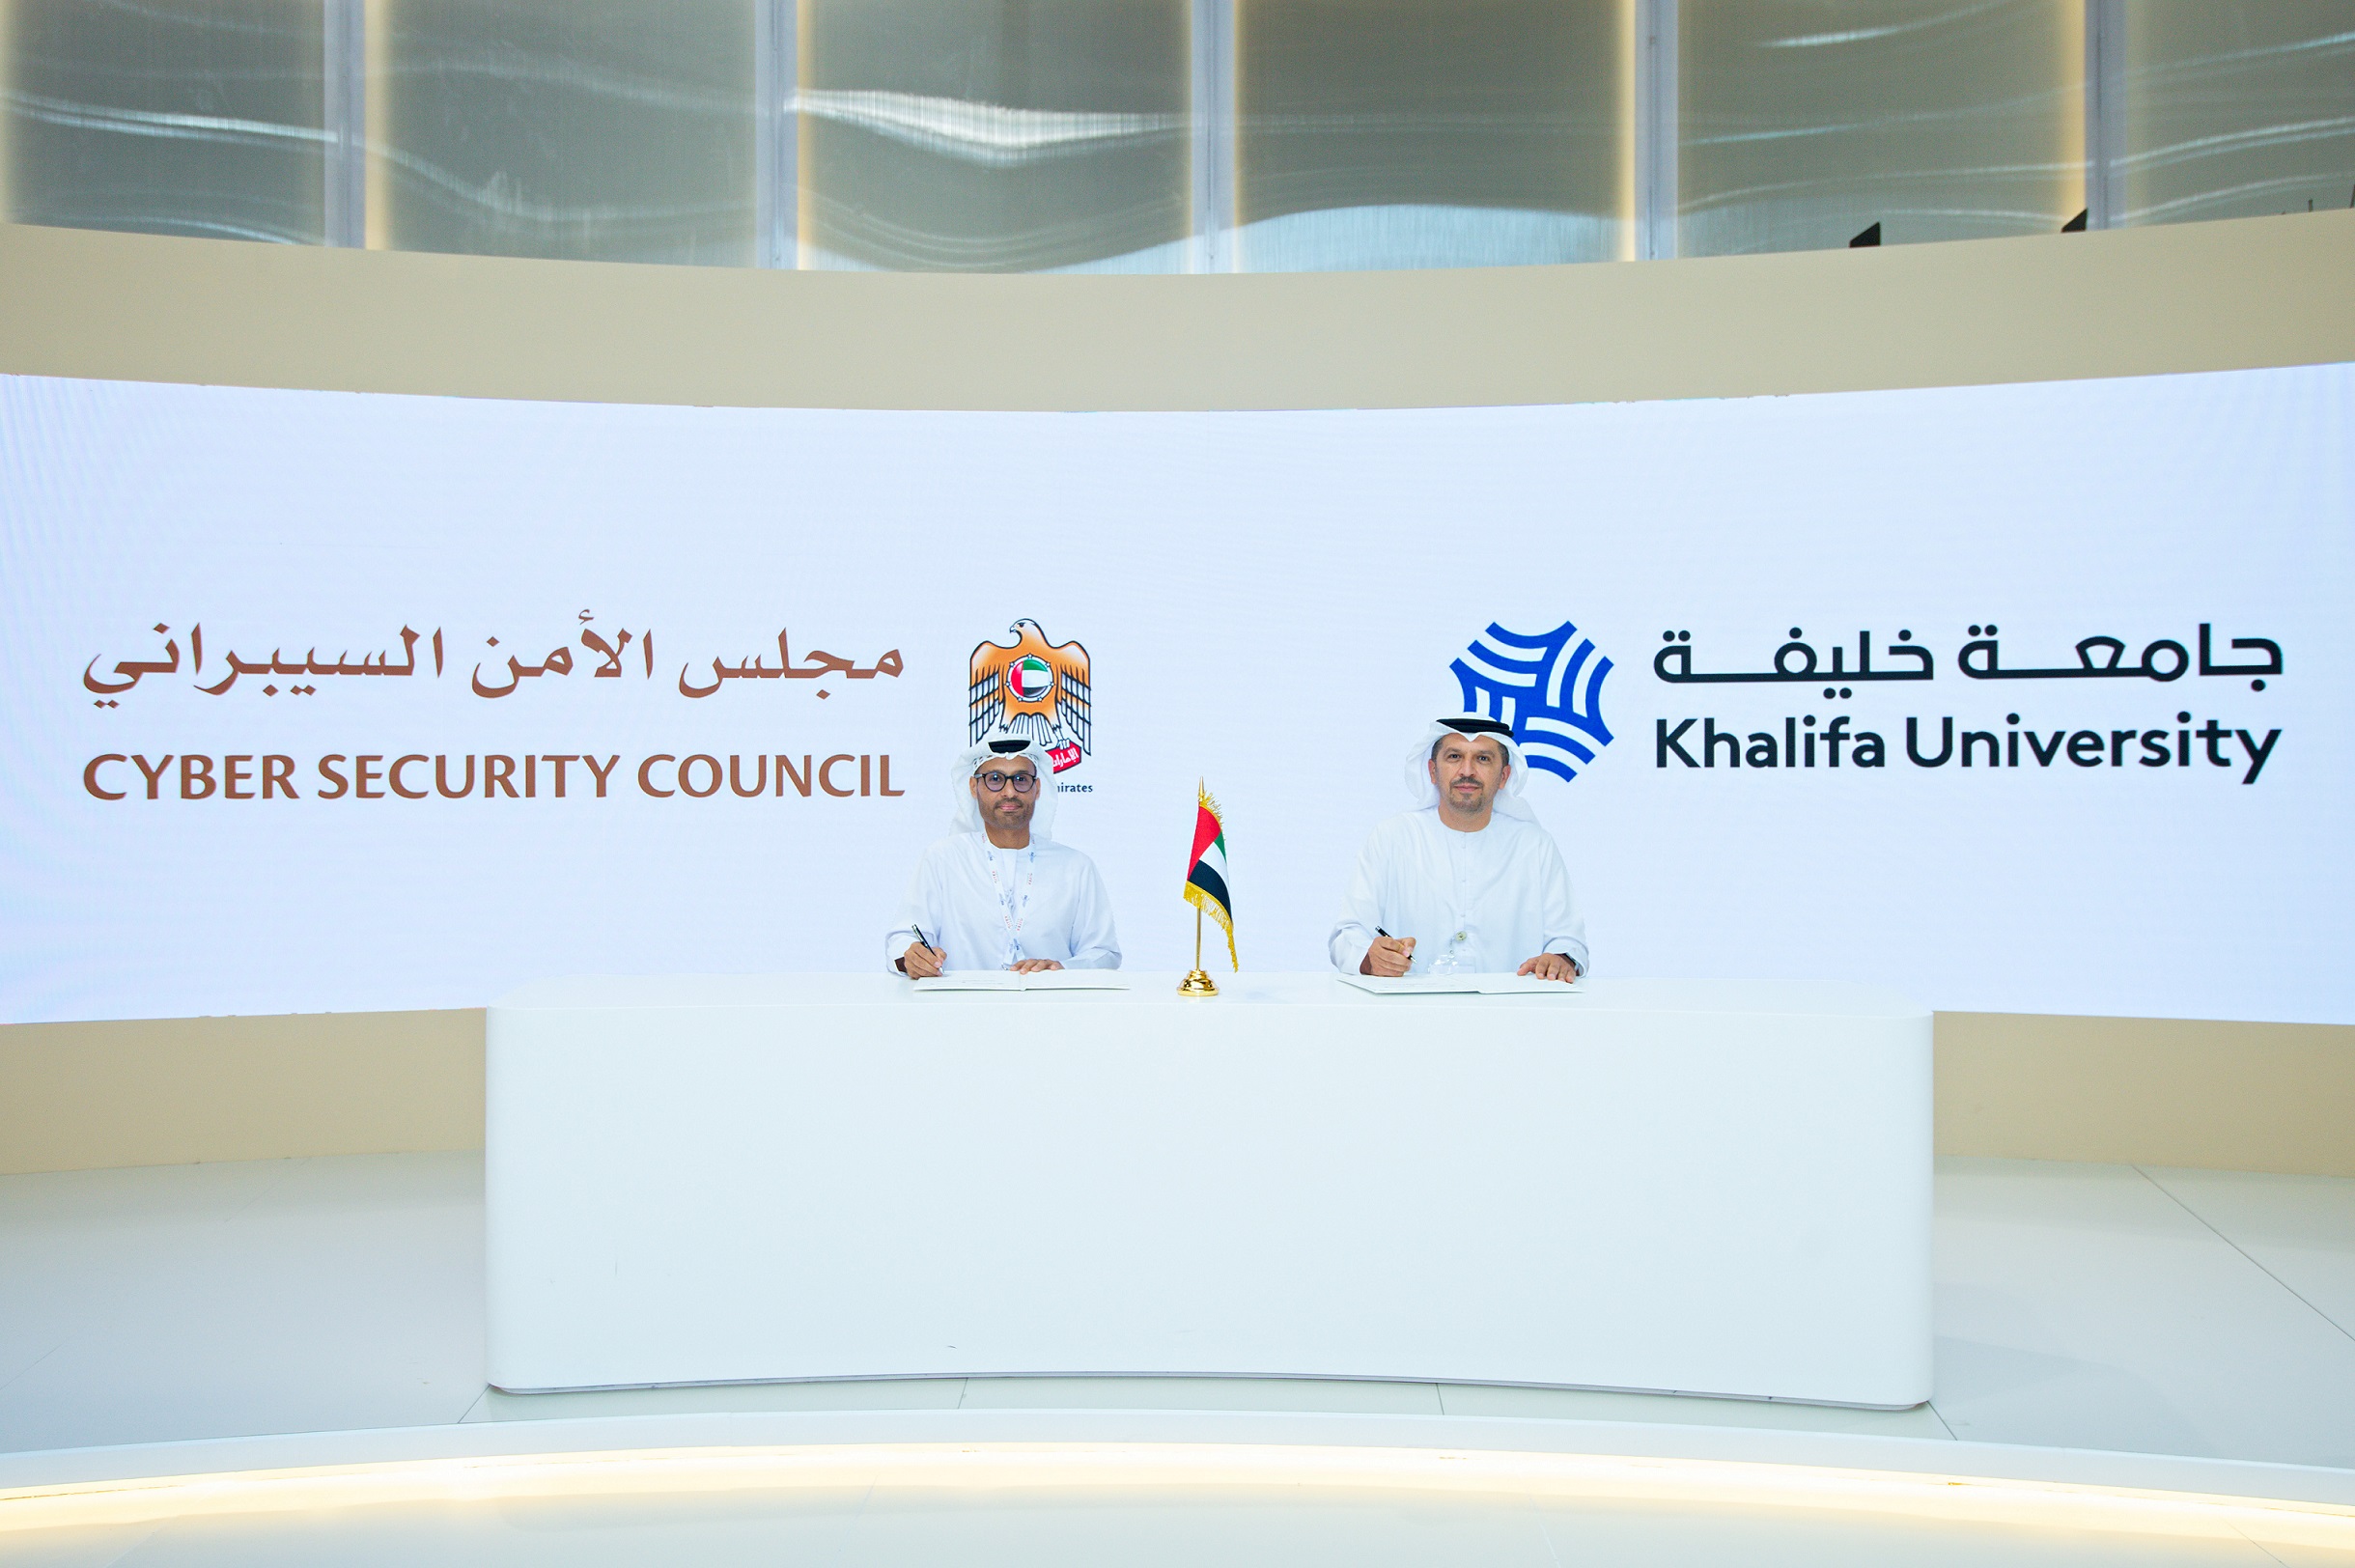 Khalifa University Signs MoU with CRC to Join UAE National Cybersecurity Center of Excellence and Establish Khalifa University Cybersecurity Academy